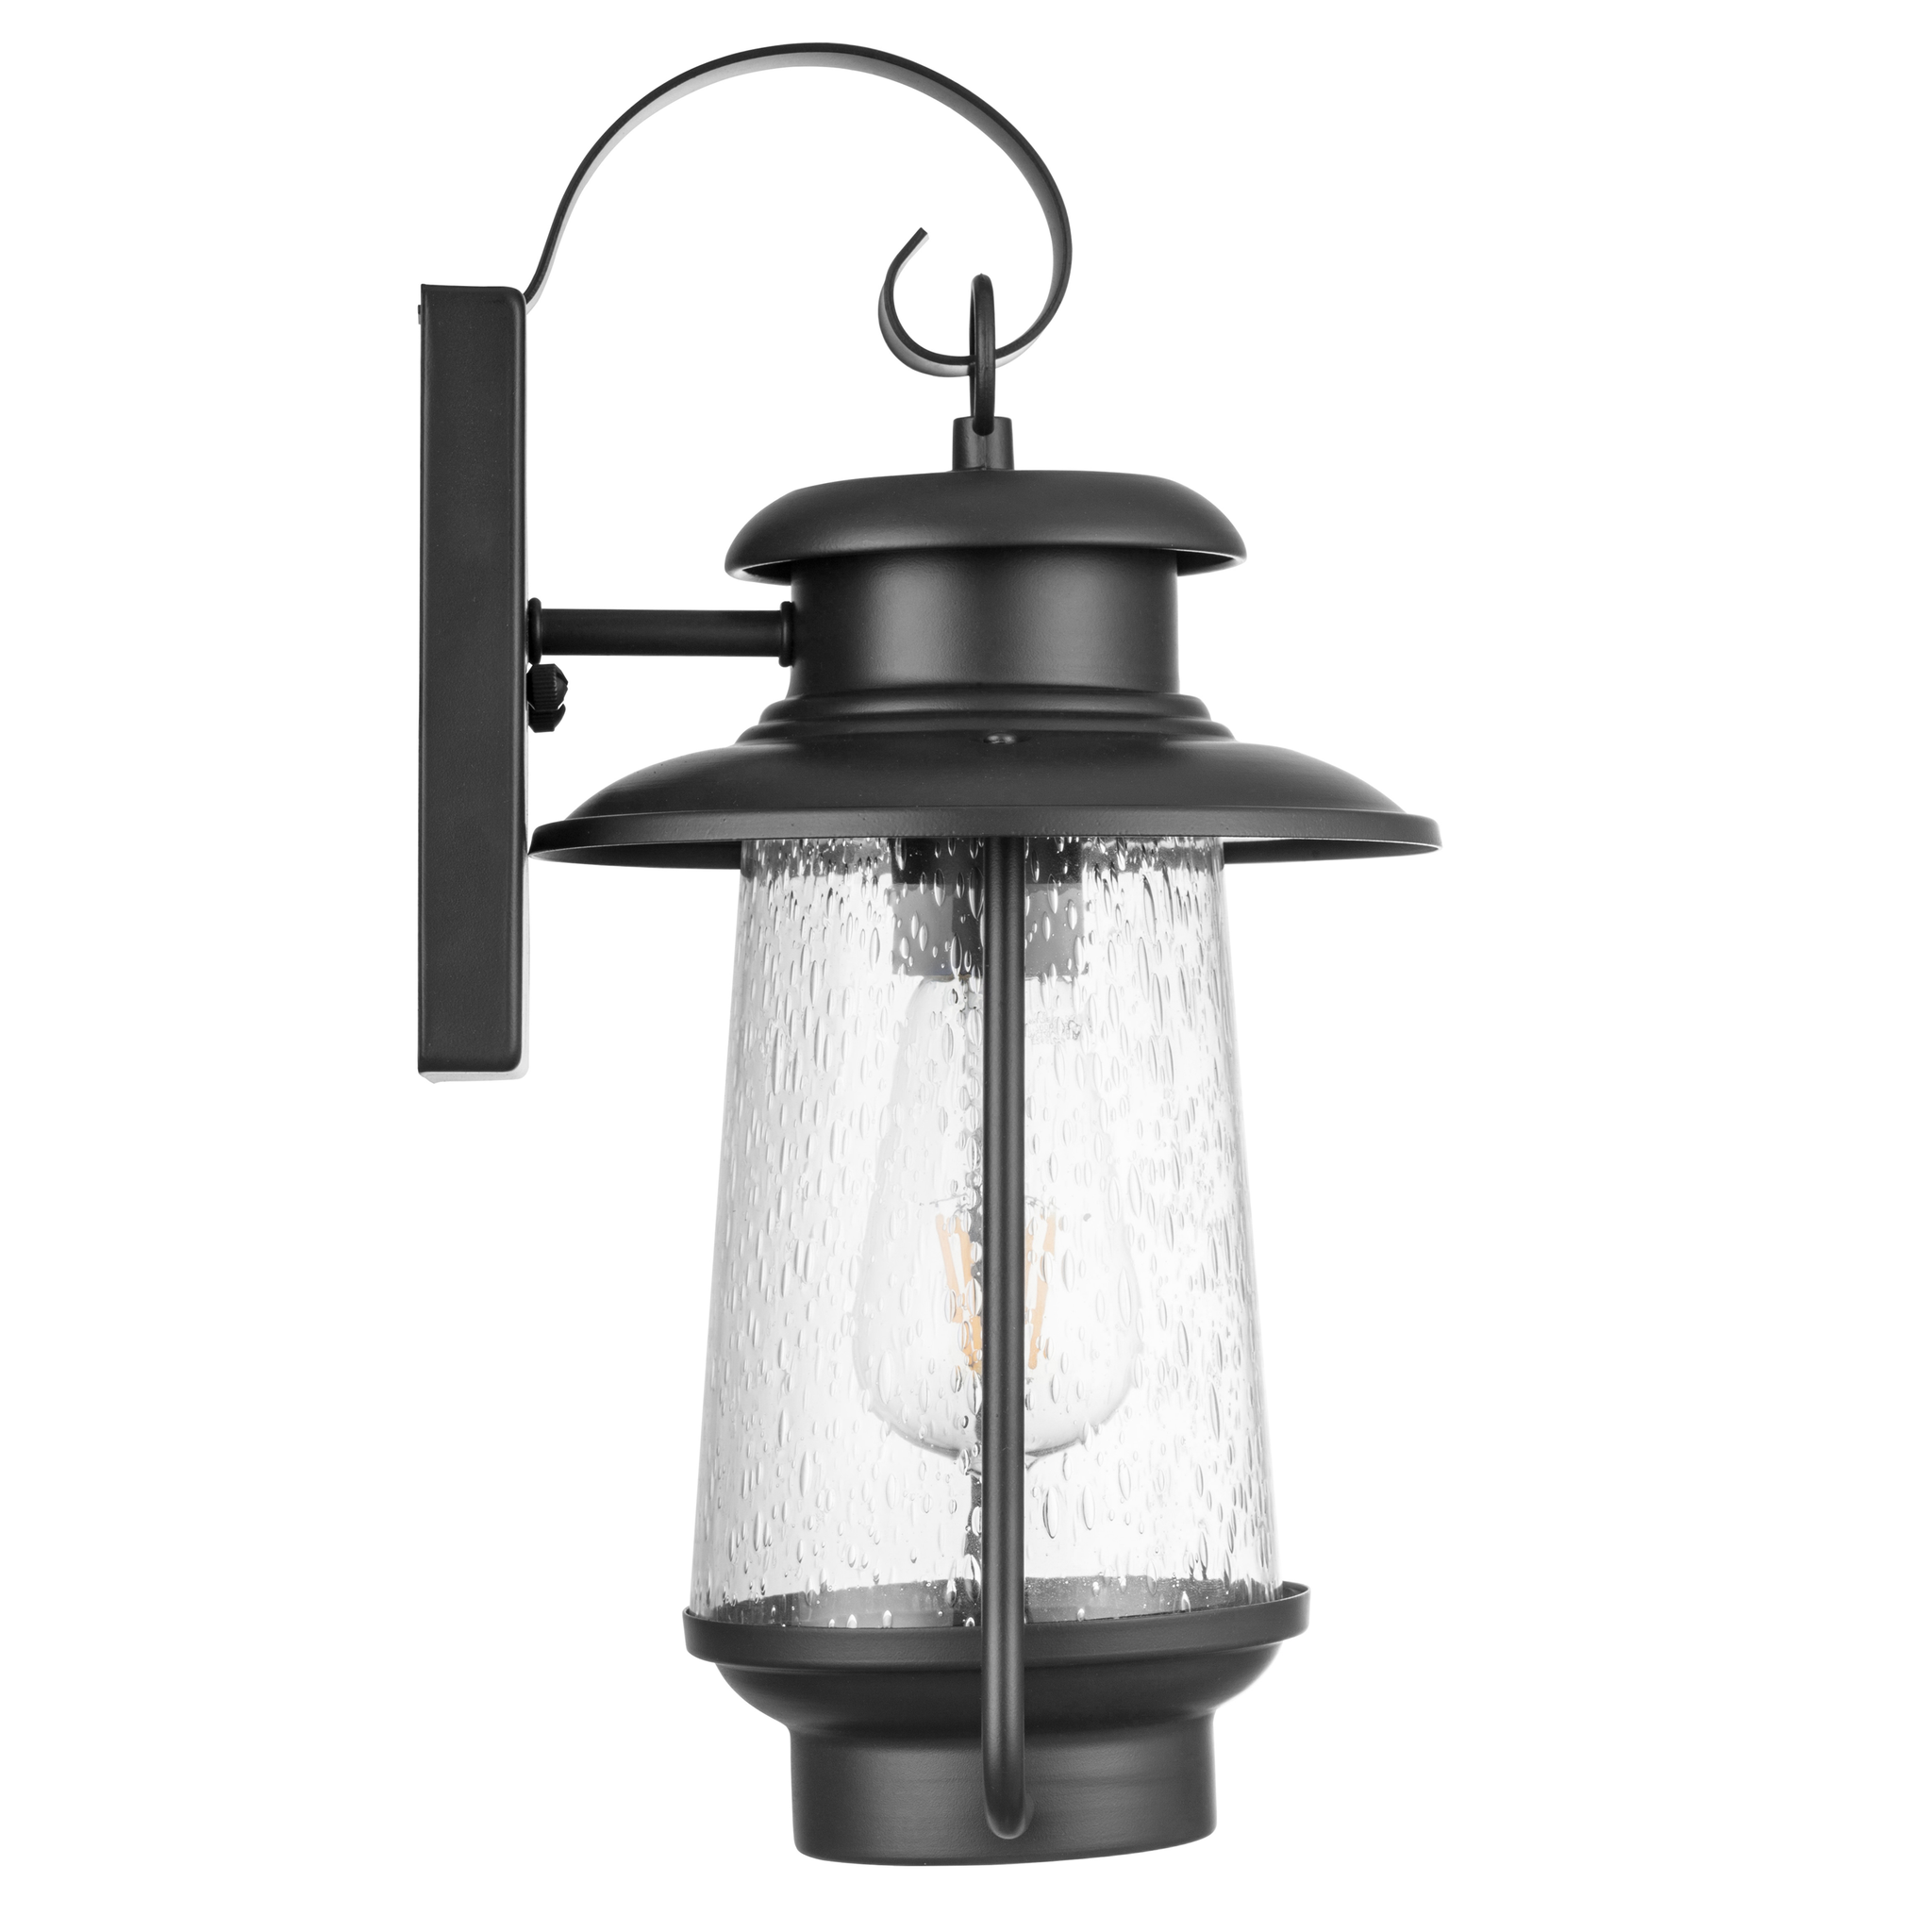 Sommerset, Wet-Rated Coach Light, Matte Black by Prominence Home